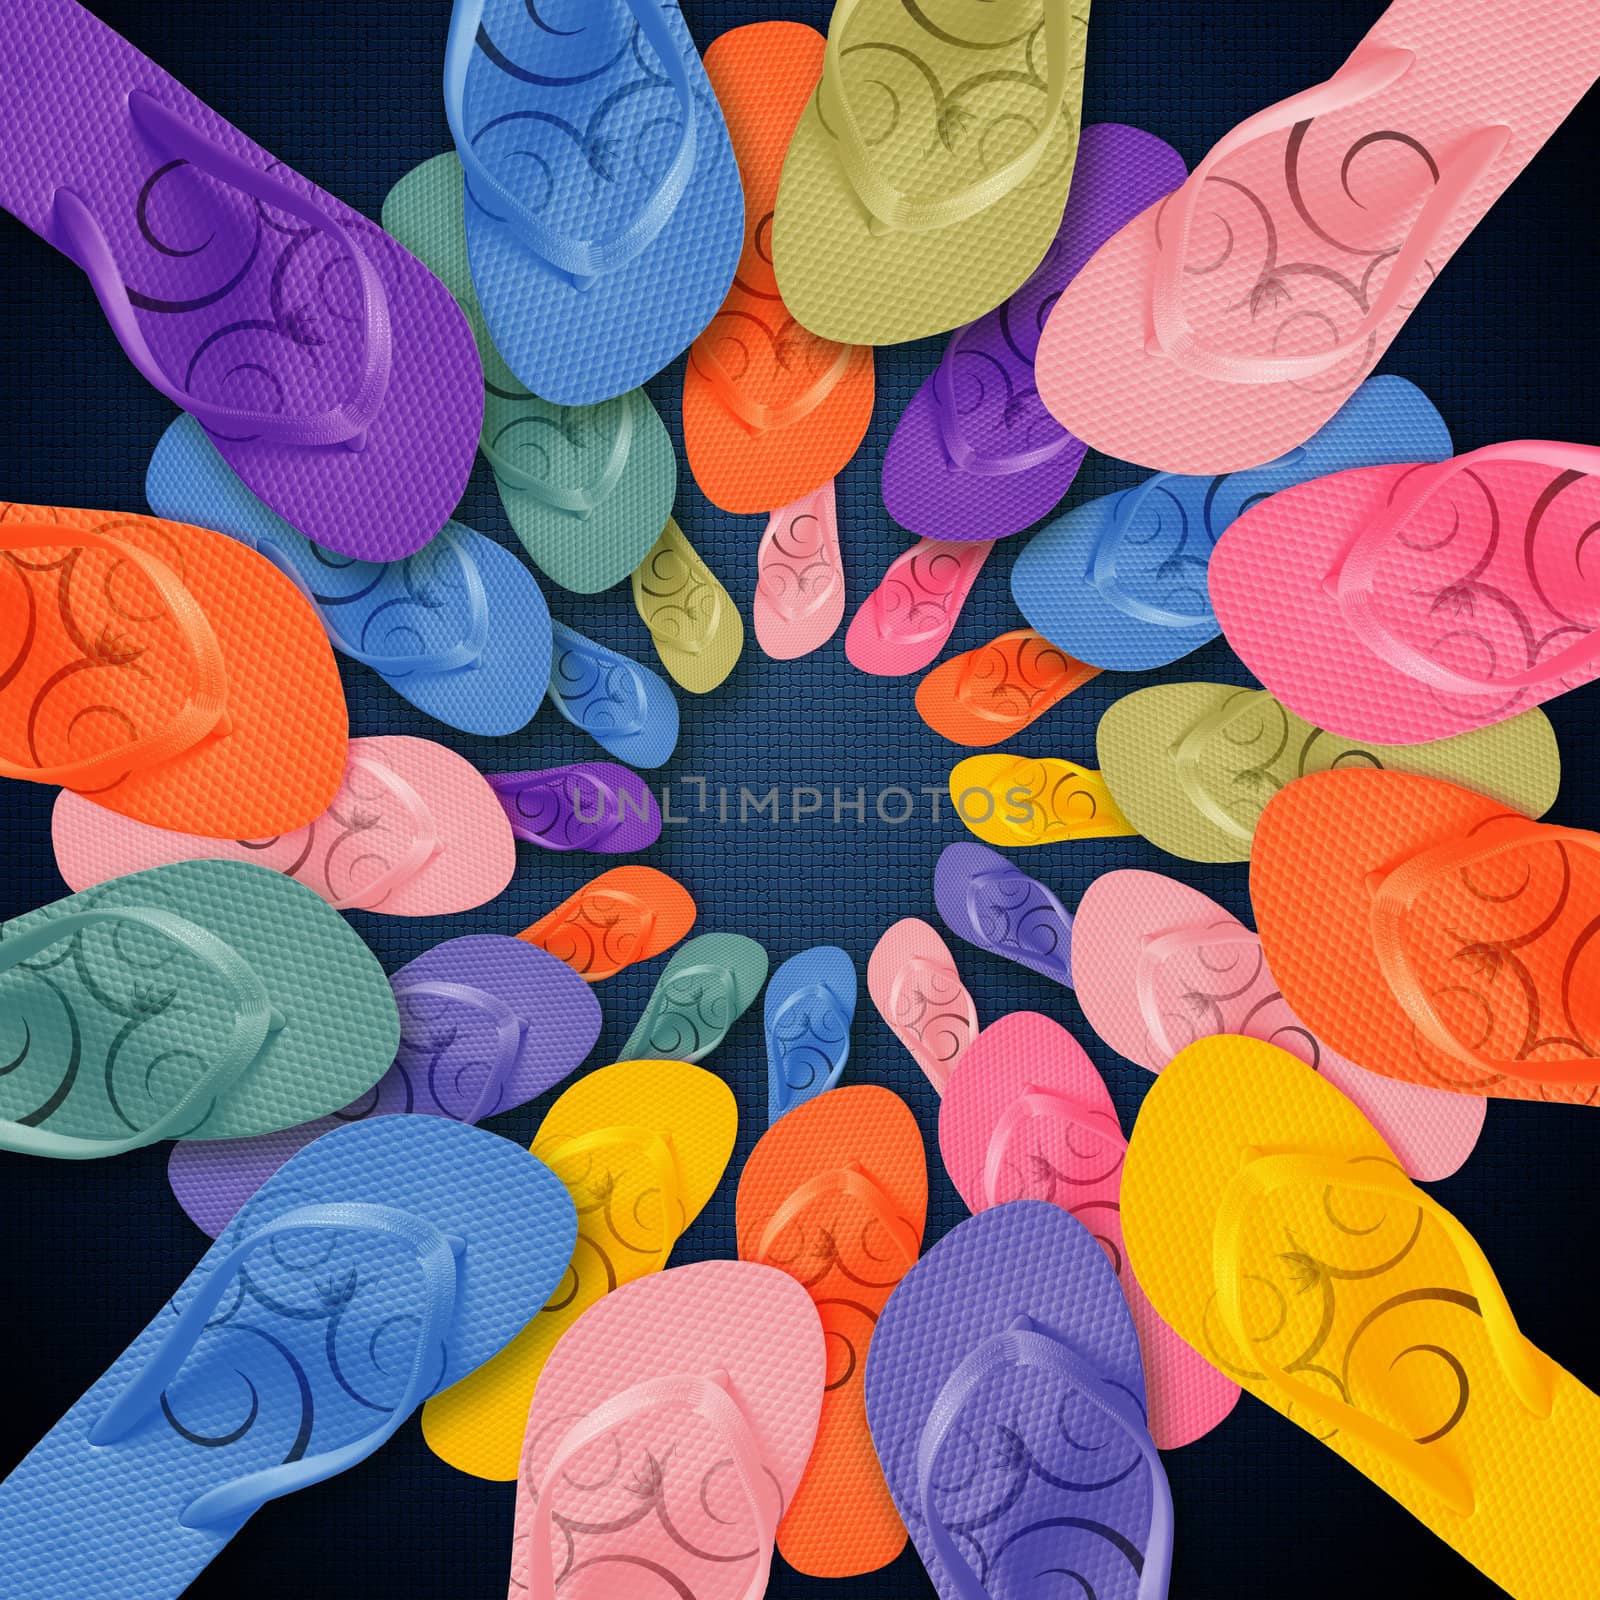 Colorful Flip Flops on circle shape, summertime with colors.